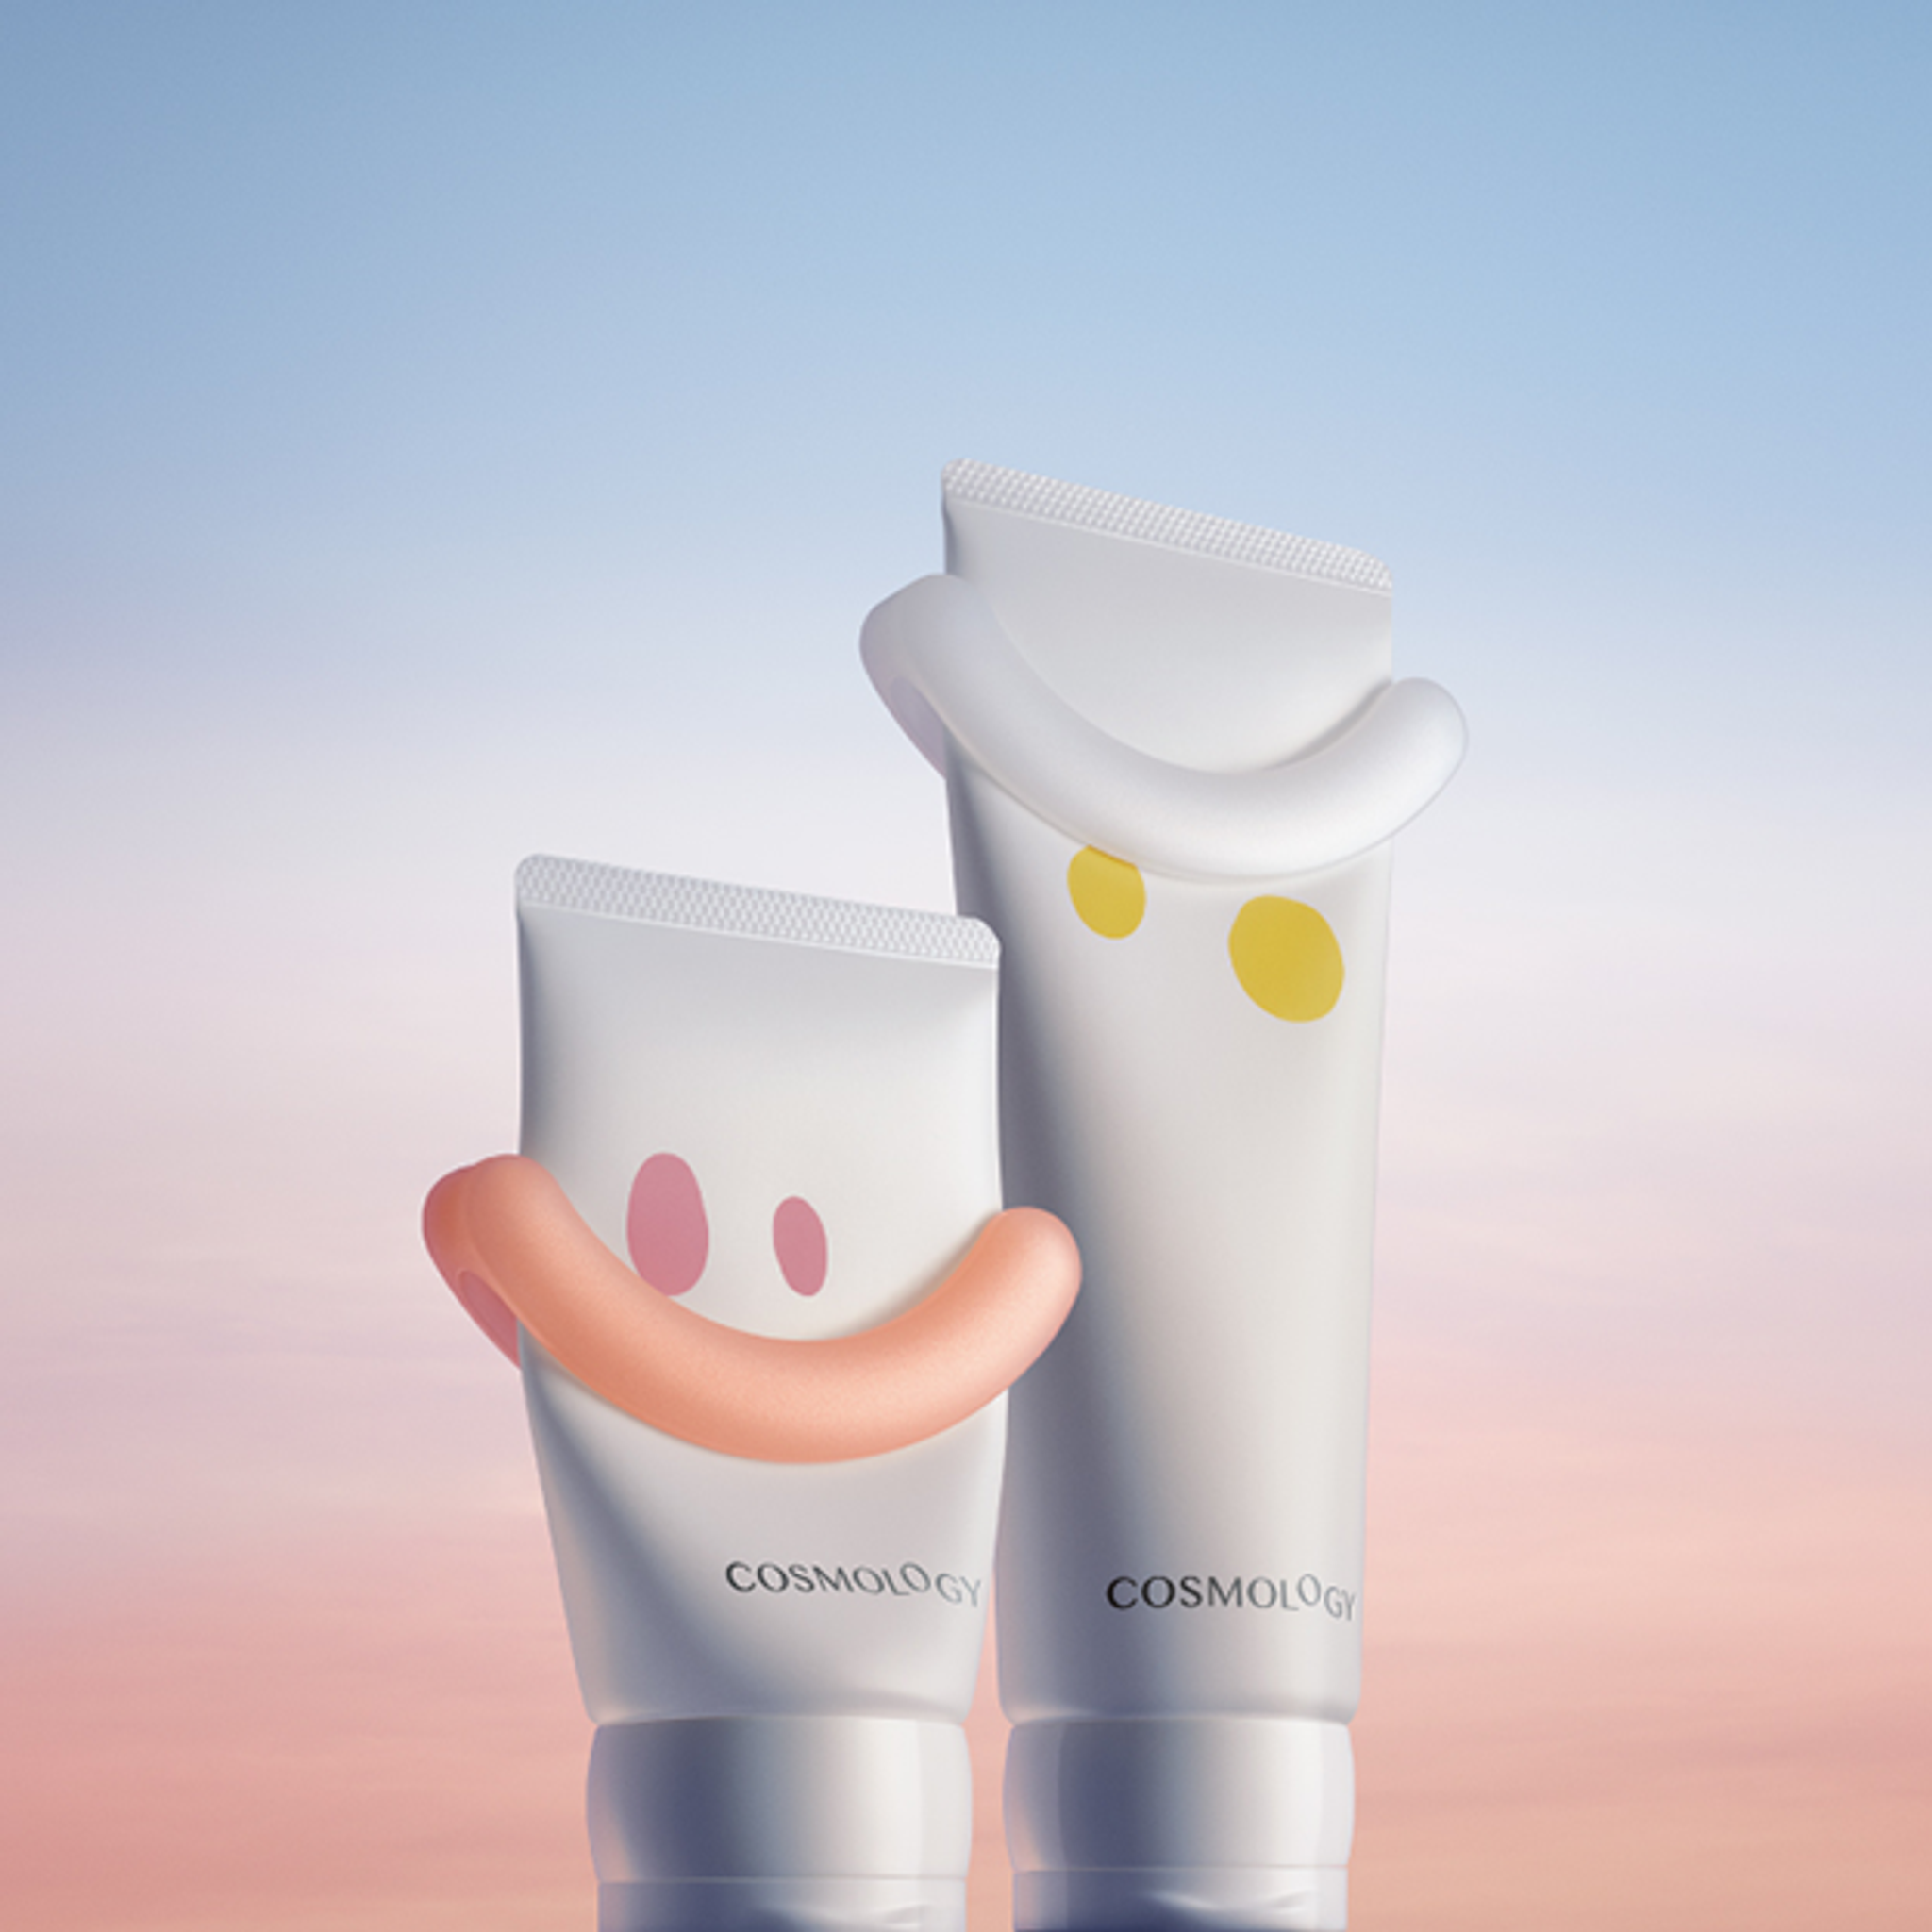 Japan's Pola releases skincare designed for space travel